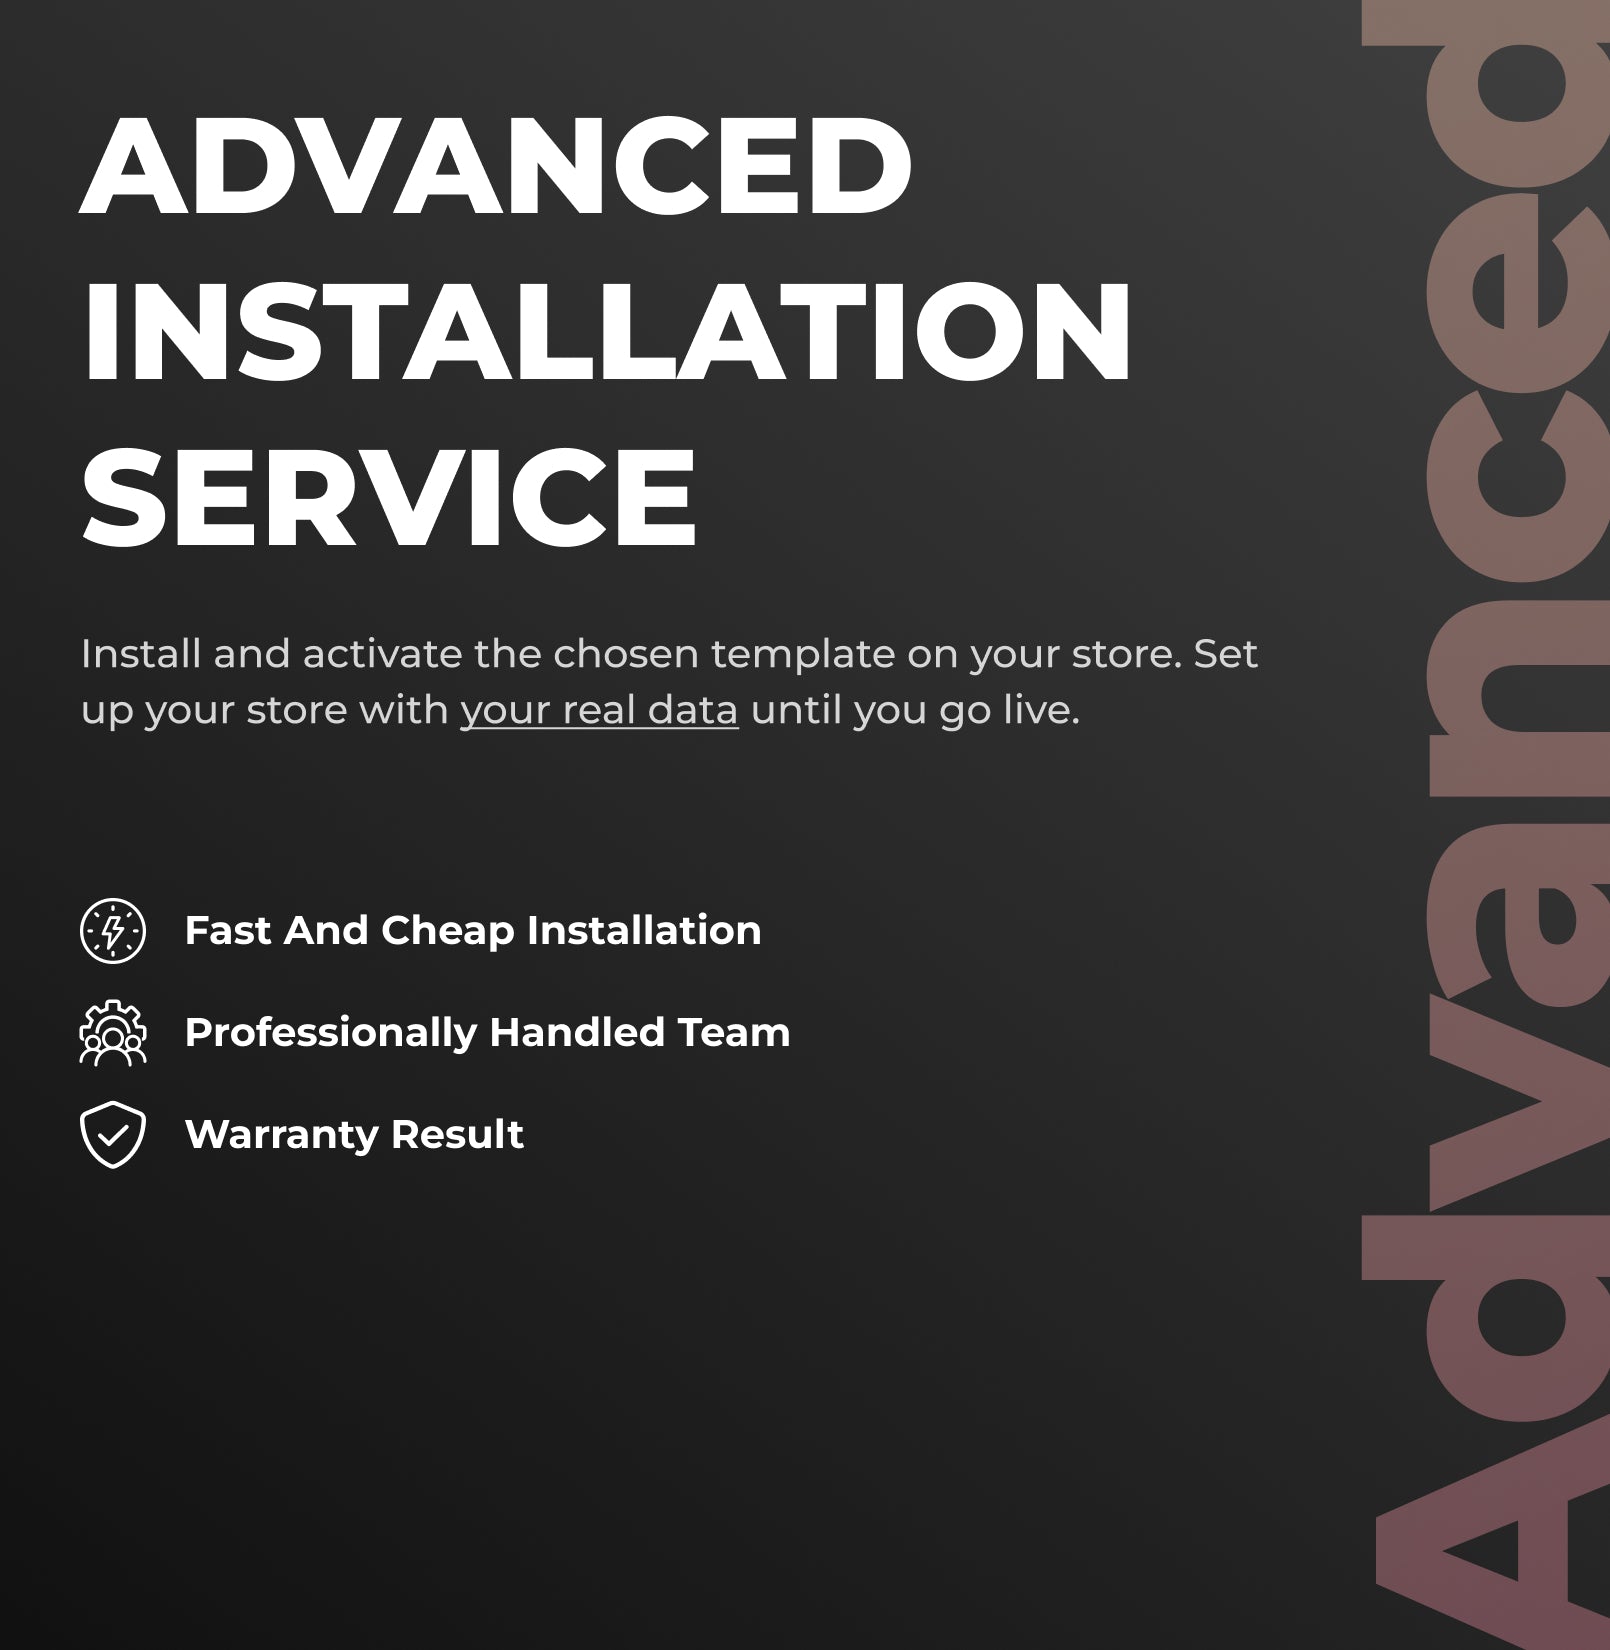 Advanced Installation Service | Full Setup for Your Ecommerce Template - Shopify and BigCommerce